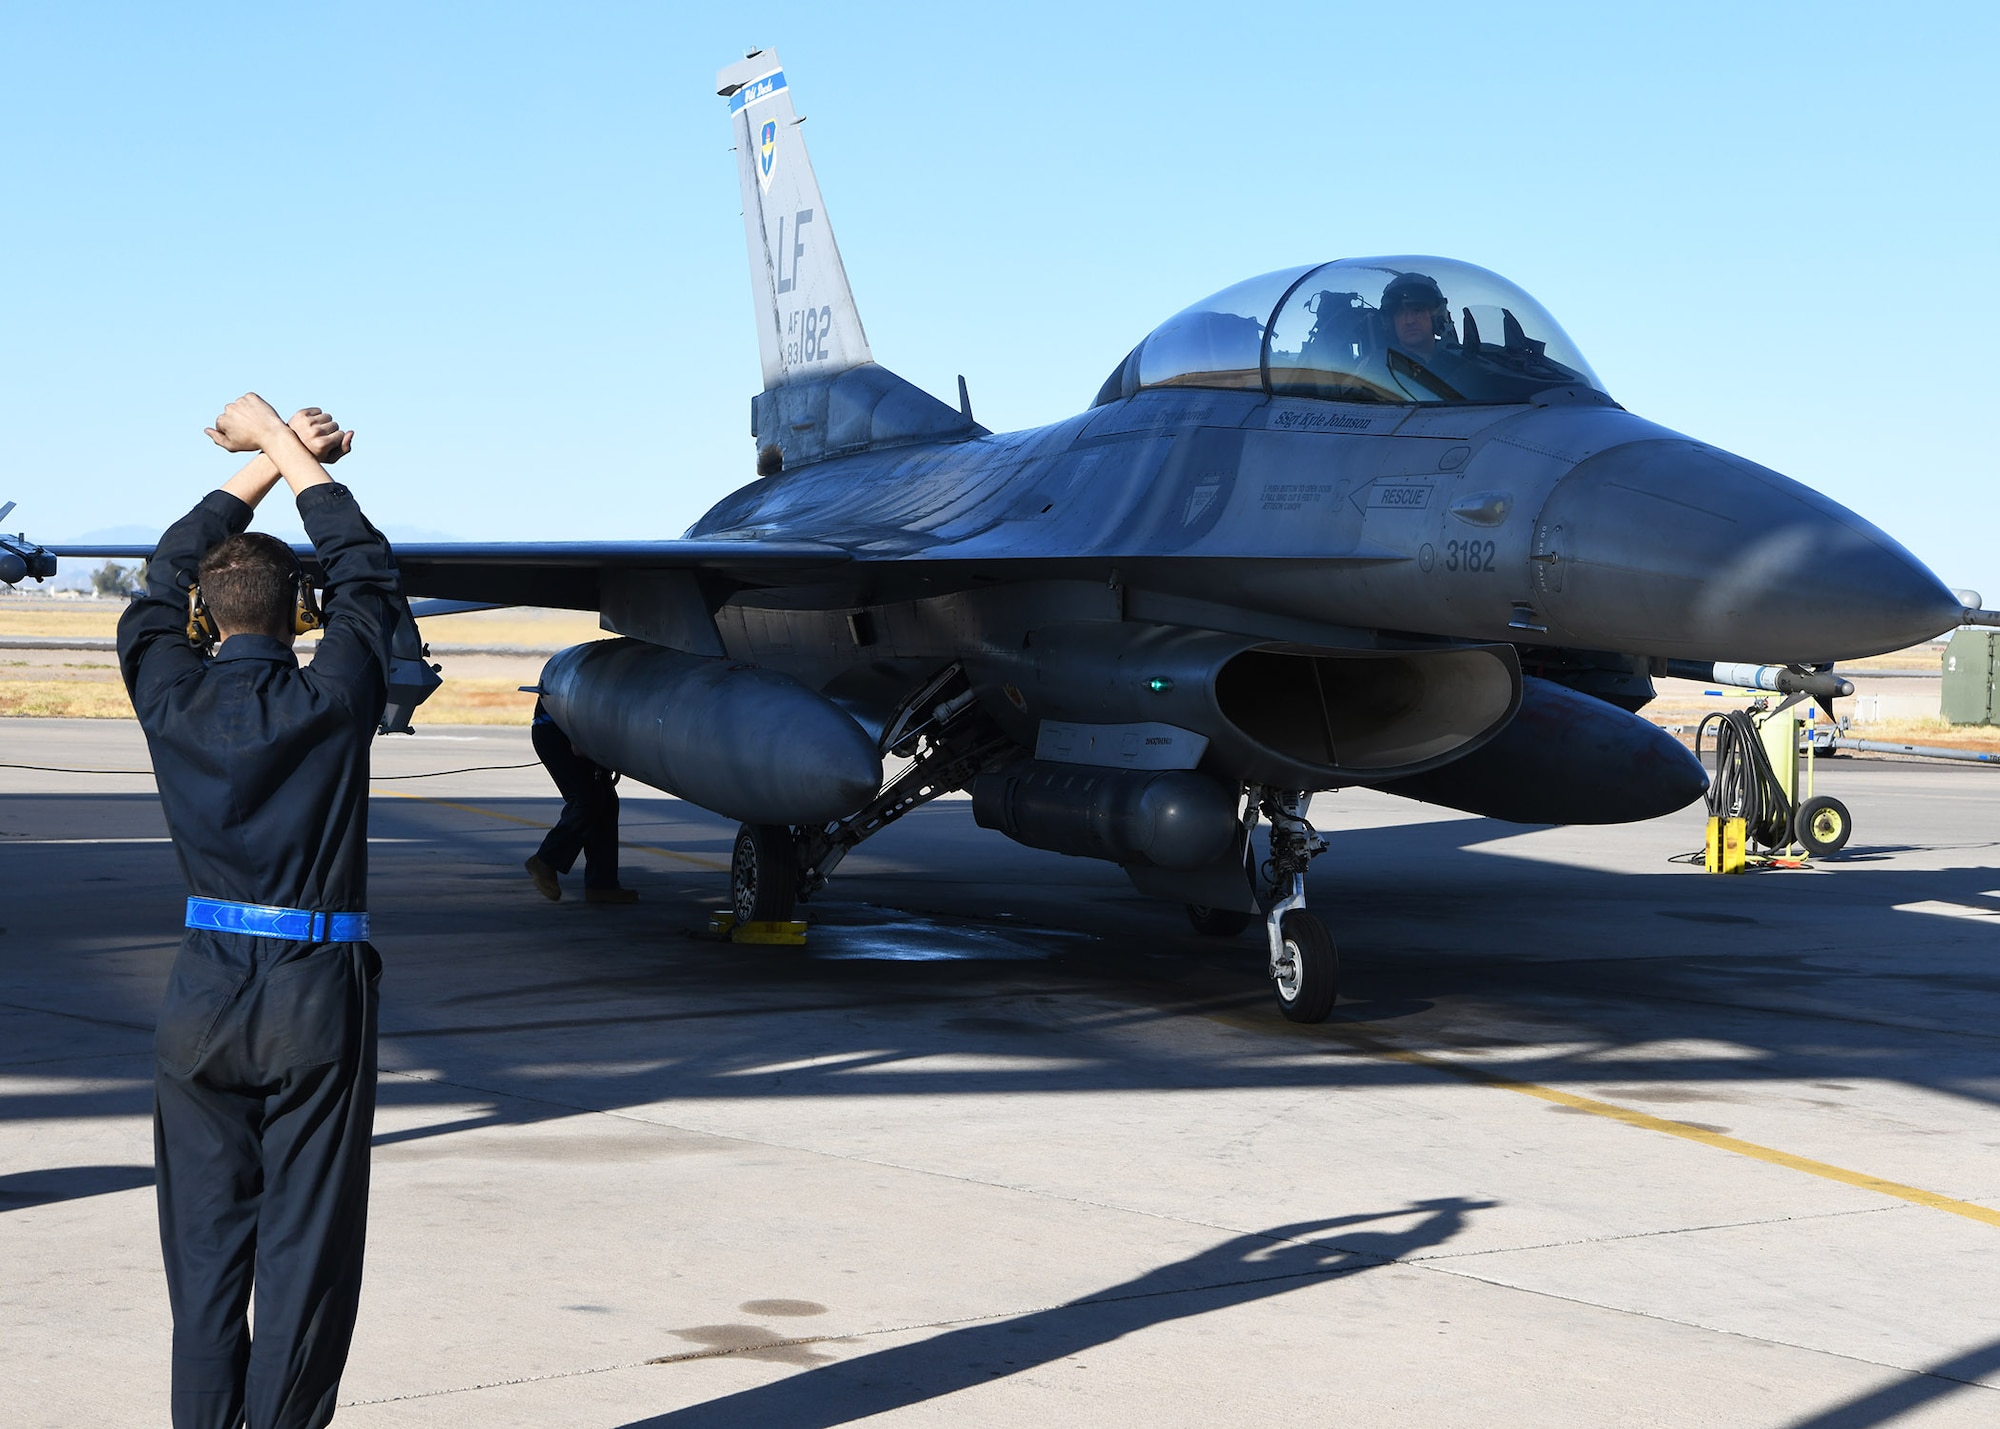 Col. Sean Rassas, 944th Fighter Wing vice commander, comes to a stop following a momentous sortie Nov. 24, 2020, at Luke Air Force Base, Ariz. During the flight, Rassas surpassed three thousand flying hours in the F-16 Fighting Falcon, becoming one of only 296 U.S. Air Force pilots to reach that milestone.